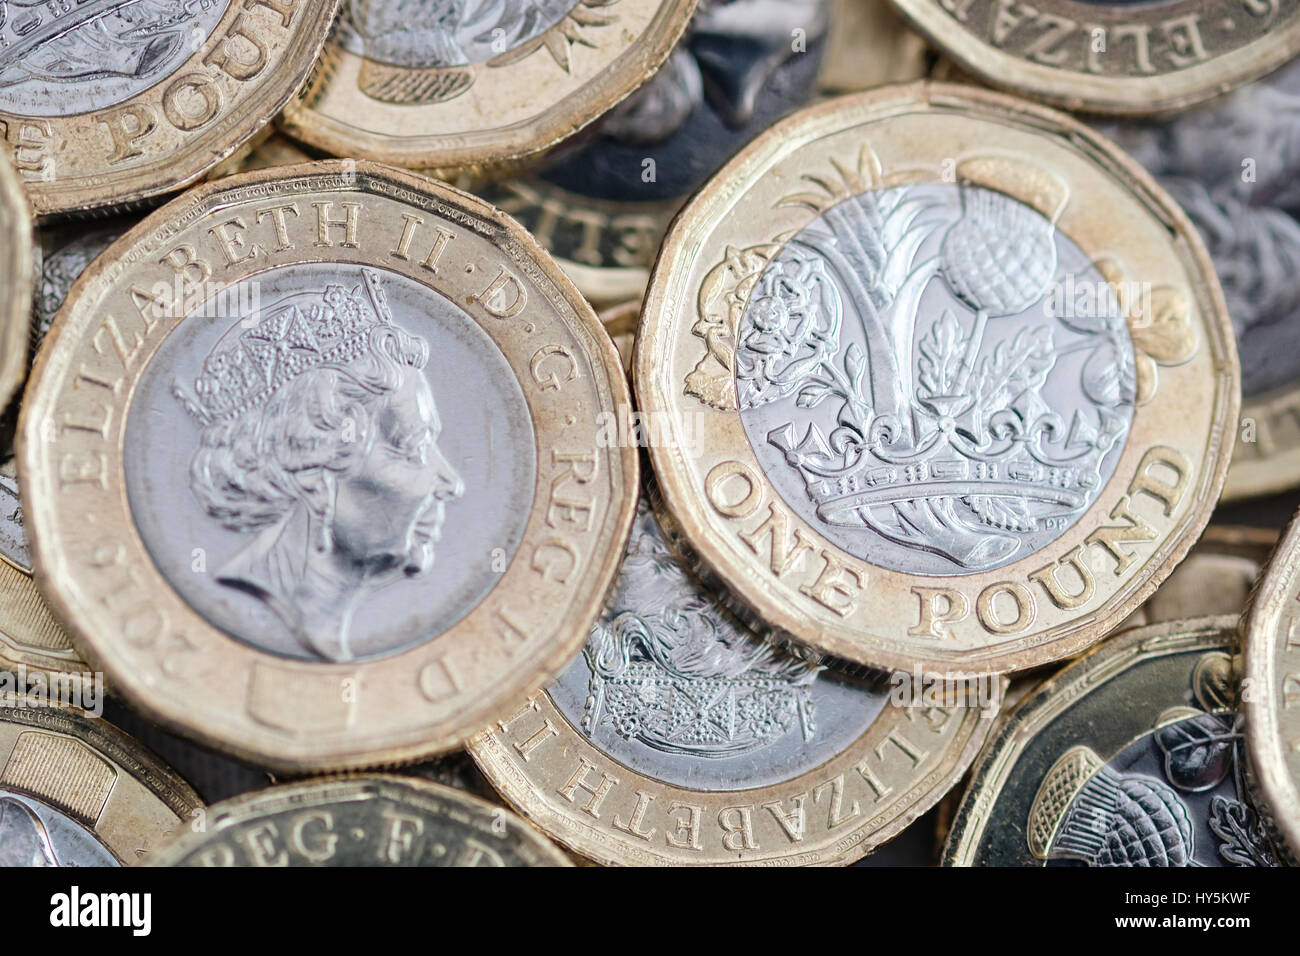 Pile of new 2017 pound coins Stock Photo